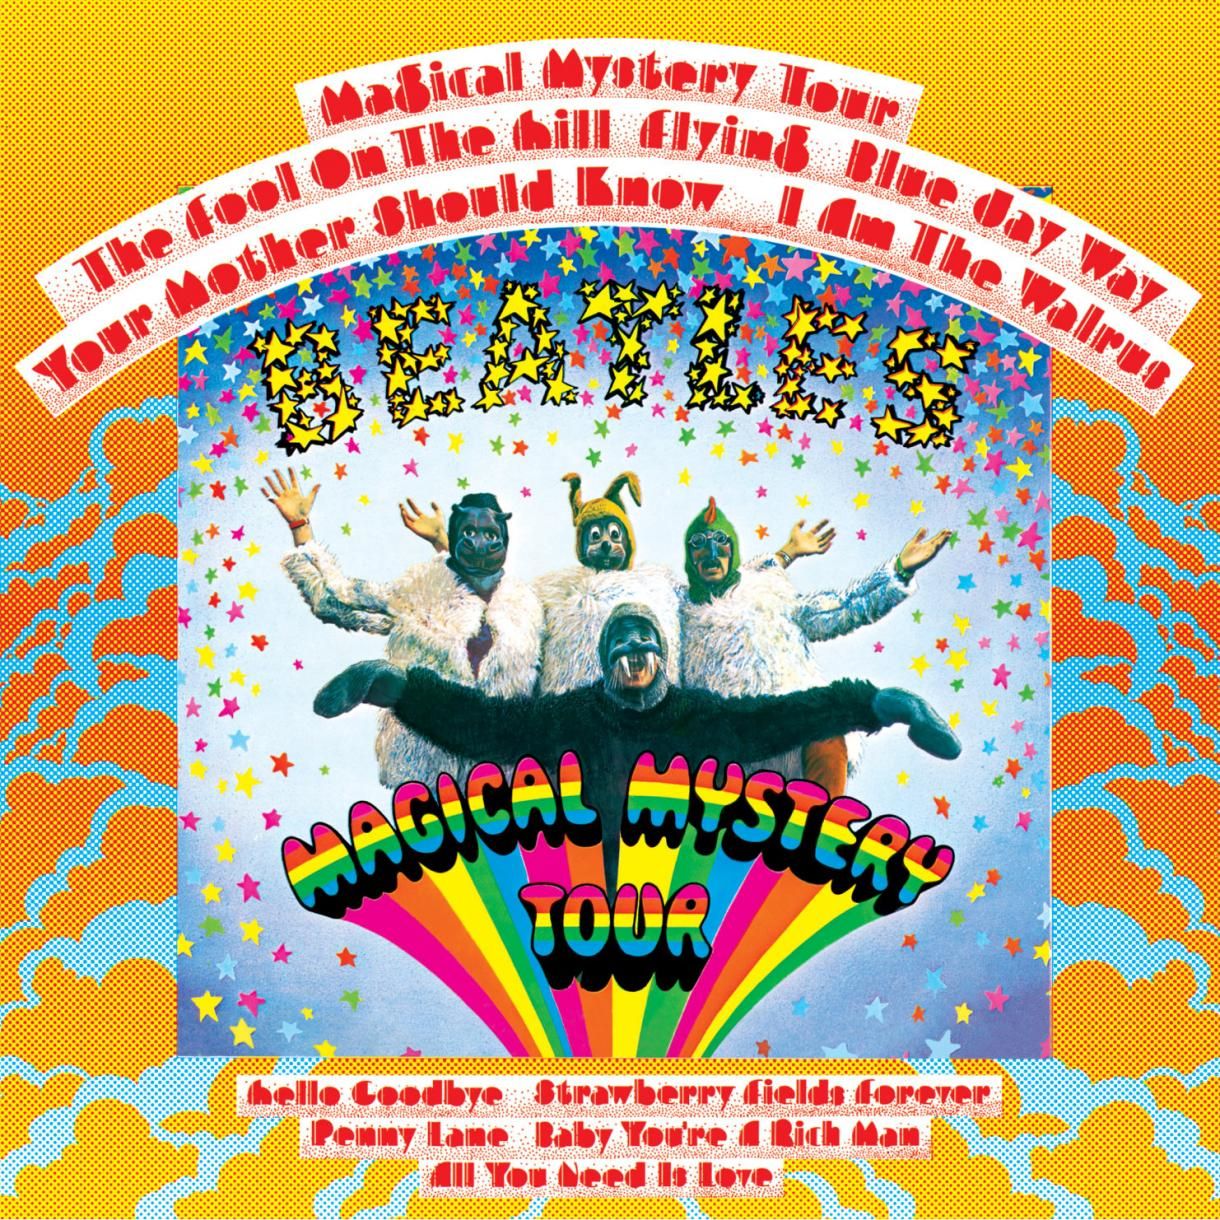 Ranking The Beatles: Magical Mystery Tour (Beatles Week 206 Day 6)